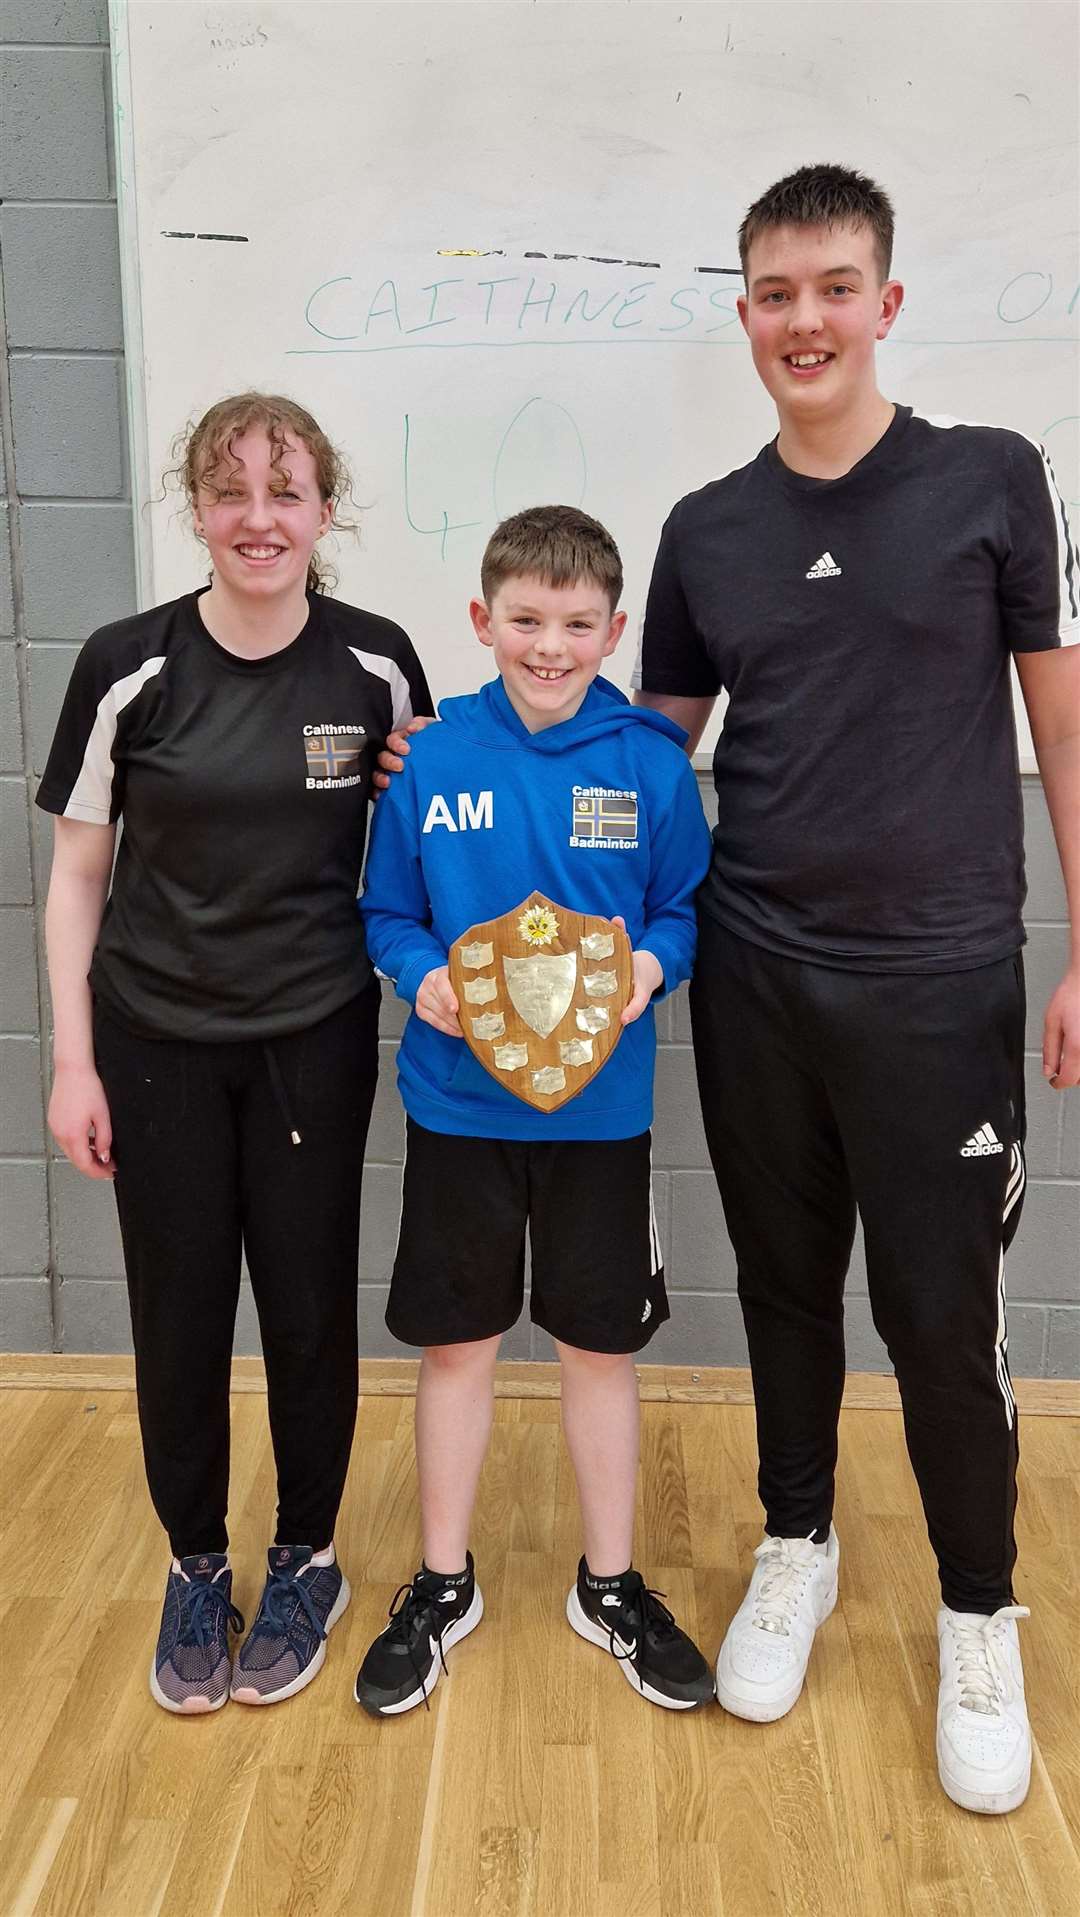 Angus Mackay, on behalf of A & J Mackay Plumbing and Heating Ltd, one of the event sponsors, presenting the shield to Caithness team captains Kirsty Henderson and Taylor Swan.